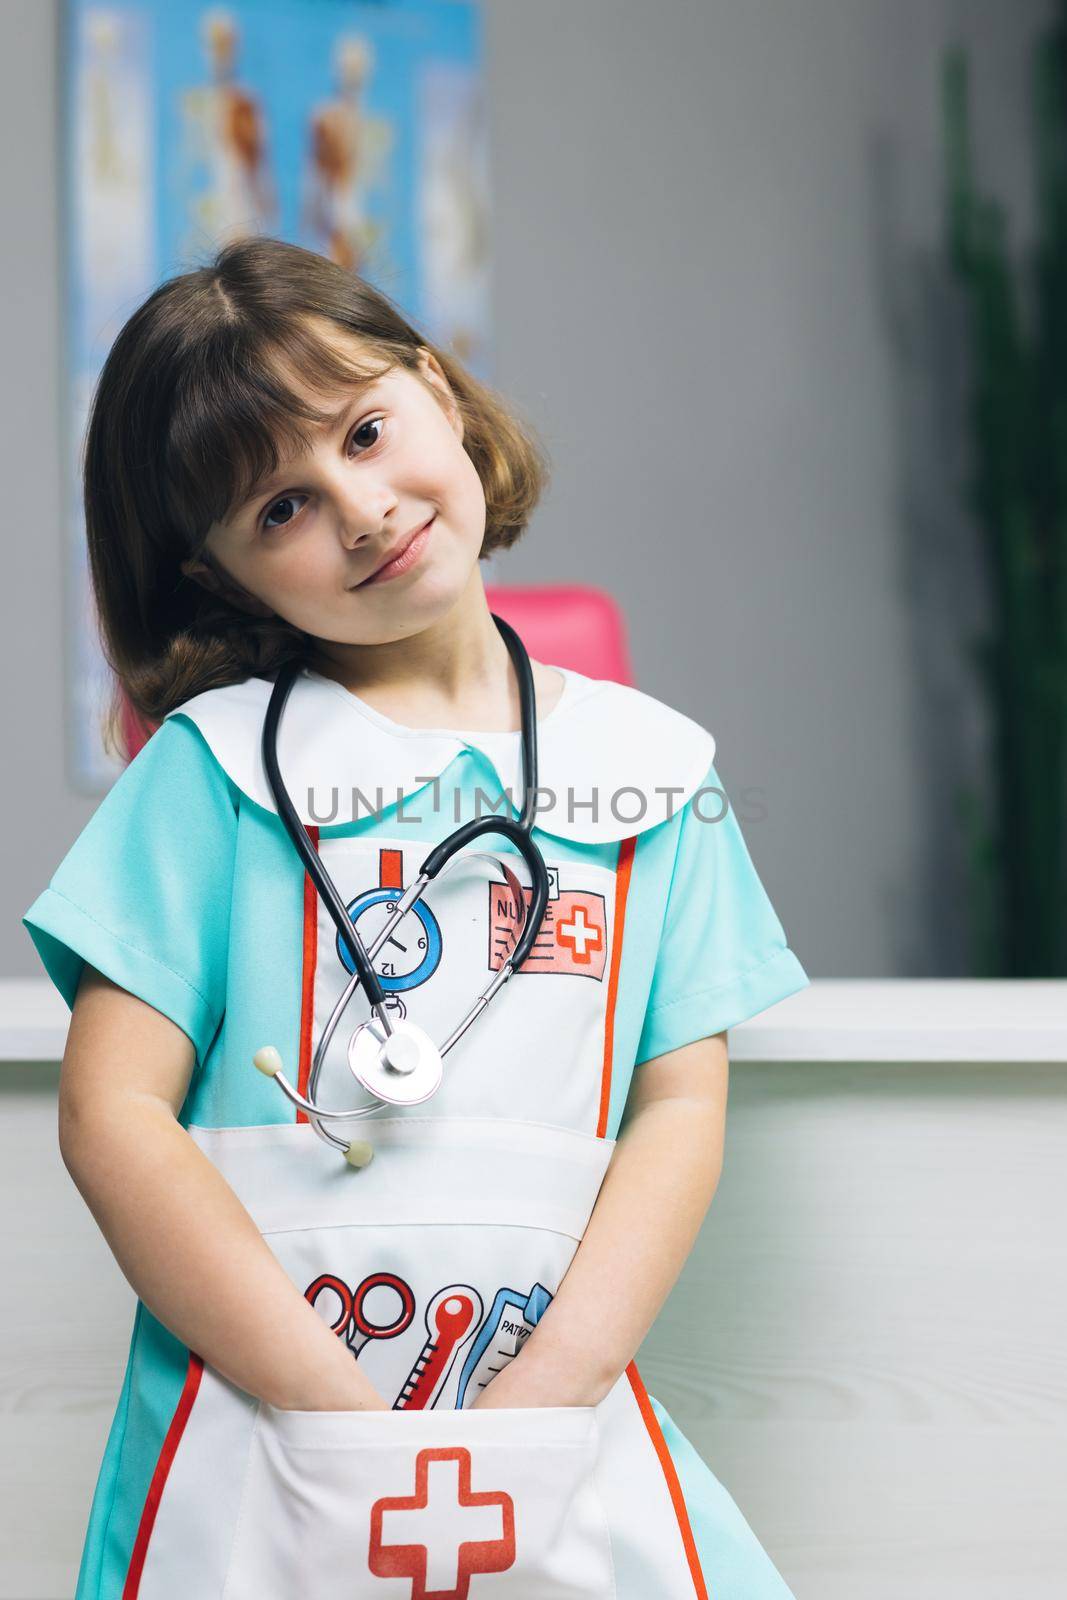 Funny little girl looking at camera at home. Cute kid child with pretty face. Concept of a happy childhood. Portrait of girl in medic uniform looking at camera